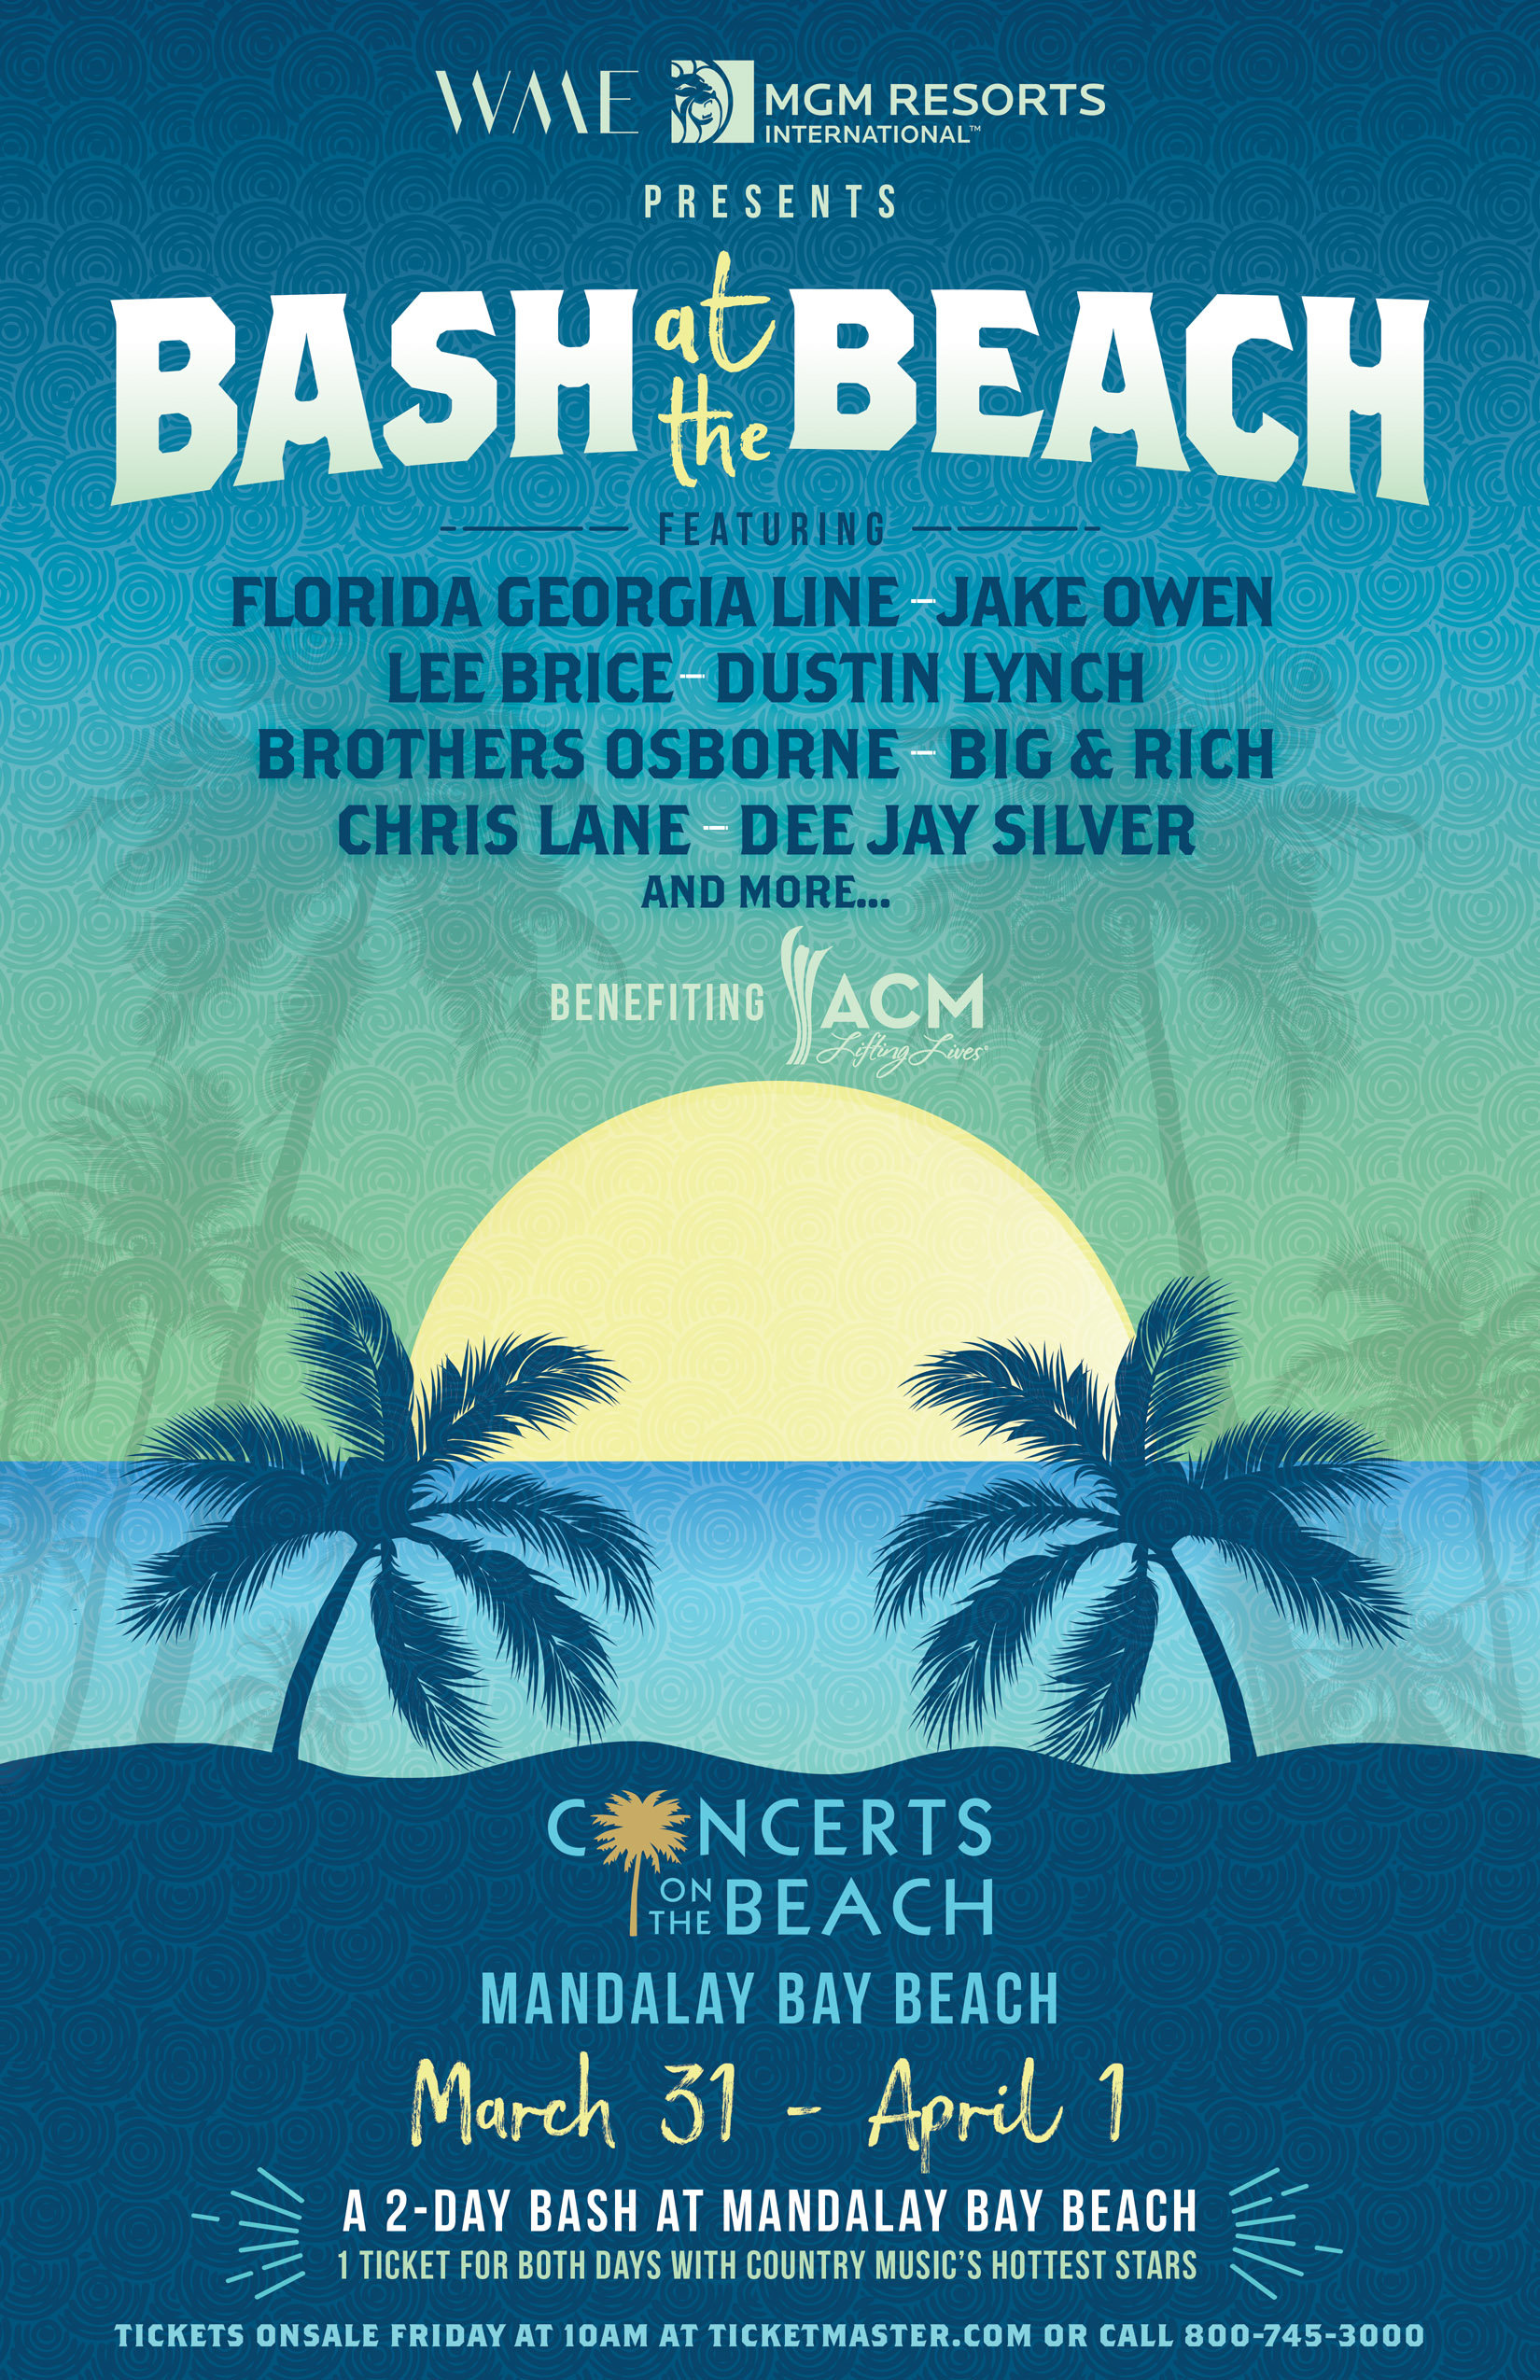 Florida Georgia Line, Jake Owen, Lee Brice & More Tapped to Perform at ‘Bash at the Beach’